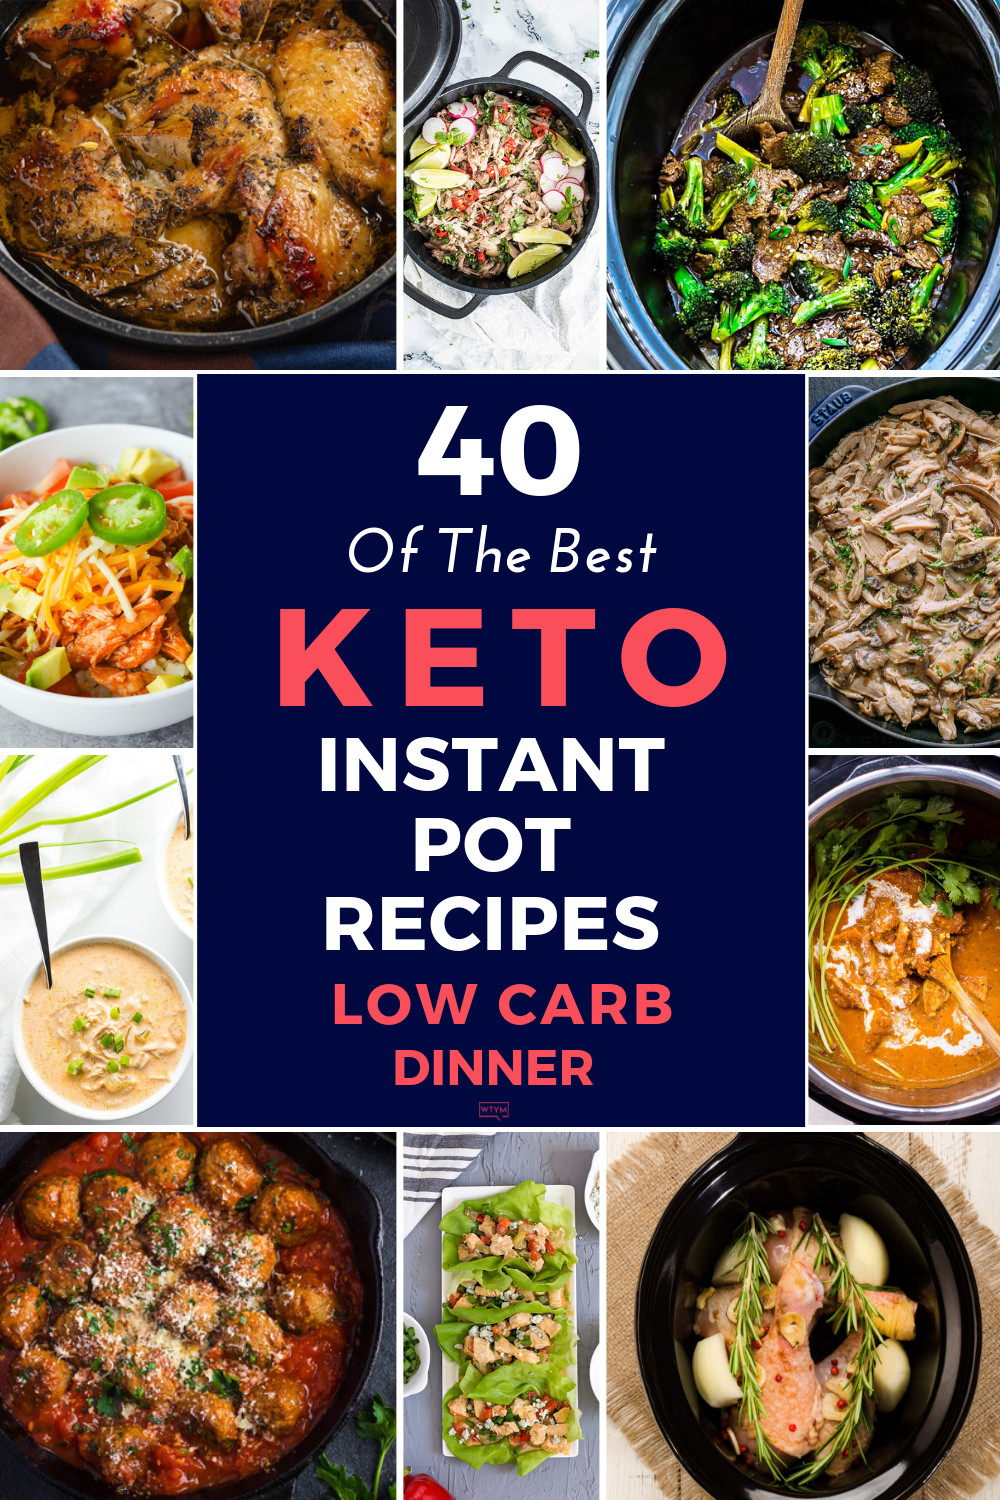 Healthy Keto Dinner Recipes For Two
 Keto Instant Pot Recipes 40 Easy Keto Diet Recipes That